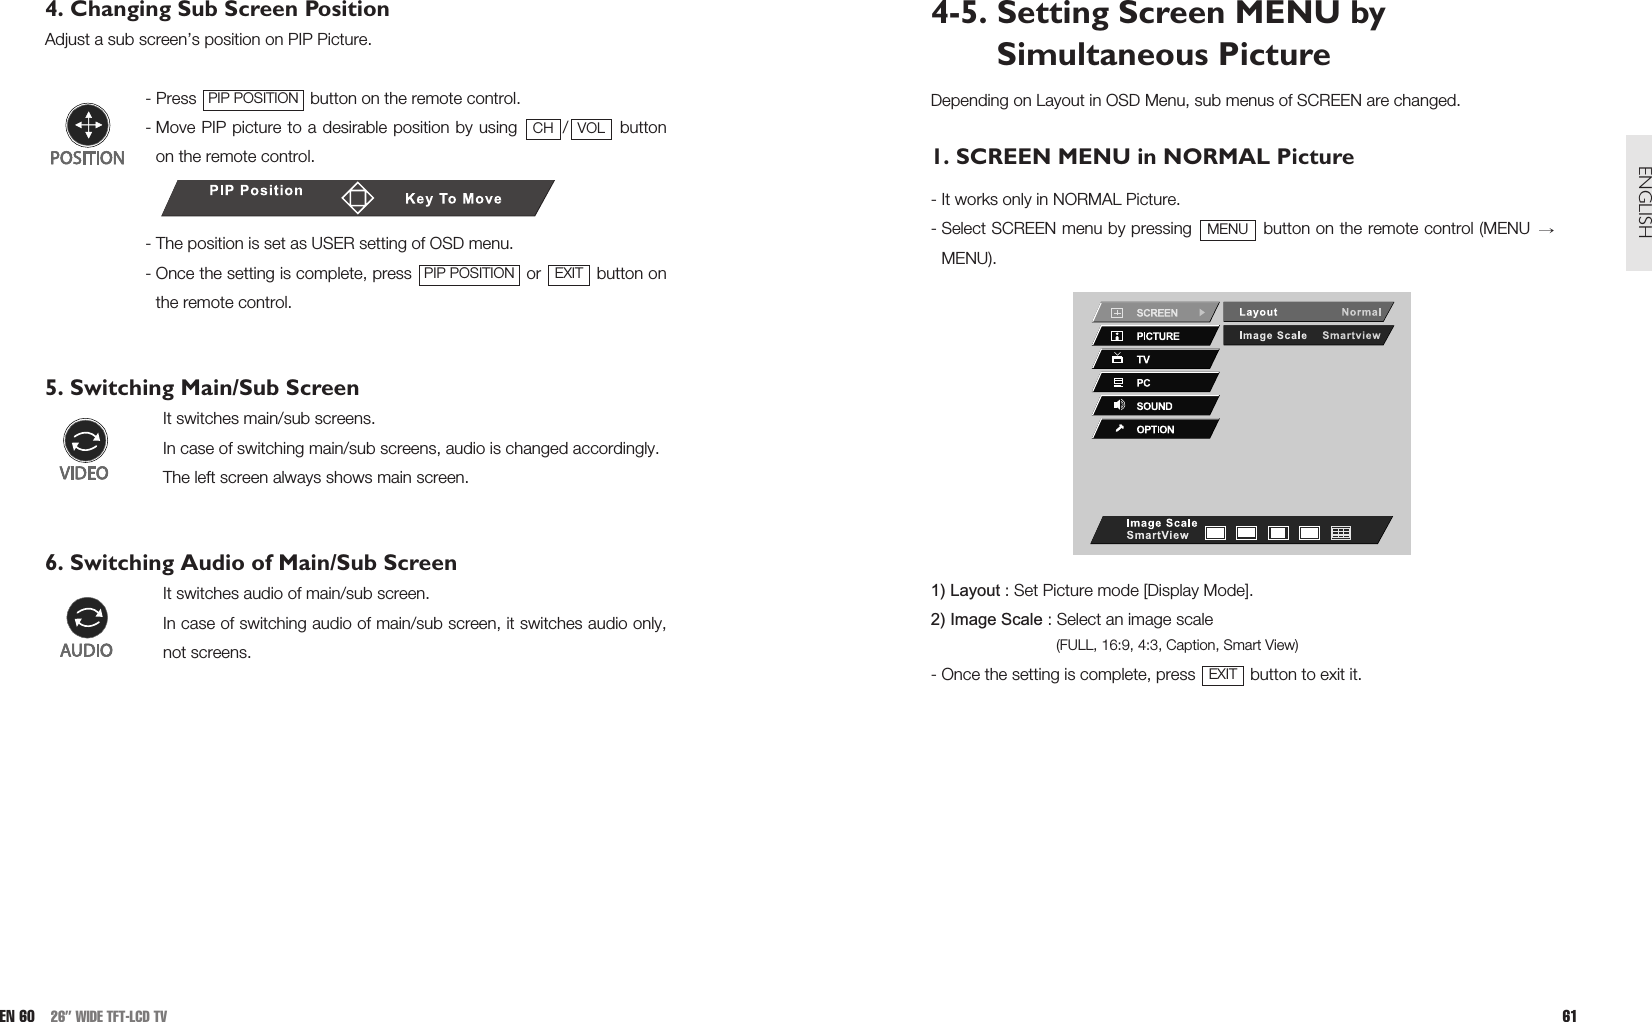 4-5. Setting Screen MENU bySimultaneous Picture Depending on Layout in OSD Menu, sub menus of SCREEN are changed.1. SCREEN MENU in NORMAL Picture  - It works only in NORMAL Picture.- Select SCREEN menu by pressing  button on the remote control (MENU MENU).1) Layout : Set Picture mode [Display Mode].2) Image Scale : Select an image scale(FULL, 16:9, 4:3, Caption, Smart View)- Once the setting is complete, press  button to exit it.EXITMENU61ENGLISH4. Changing Sub Screen PositionAdjust a sub screen’s position on PIP Picture.- Press  button on the remote control.- Move PIP picture to a desirable position by using  / buttonon the remote control.- The position is set as USER setting of OSD menu.- Once the setting is complete, press  or  button onthe remote control.5. Switching Main/Sub ScreenIt switches main/sub screens.In case of switching main/sub screens, audio is changed accordingly. The left screen always shows main screen. 6. Switching Audio of Main/Sub ScreenIt switches audio of main/sub screen.In case of switching audio of main/sub screen, it switches audio only,not screens.  EXITPIP POSITIONVOLCHPIP POSITIONEN 60 26” WIDE TFT-LCD TV